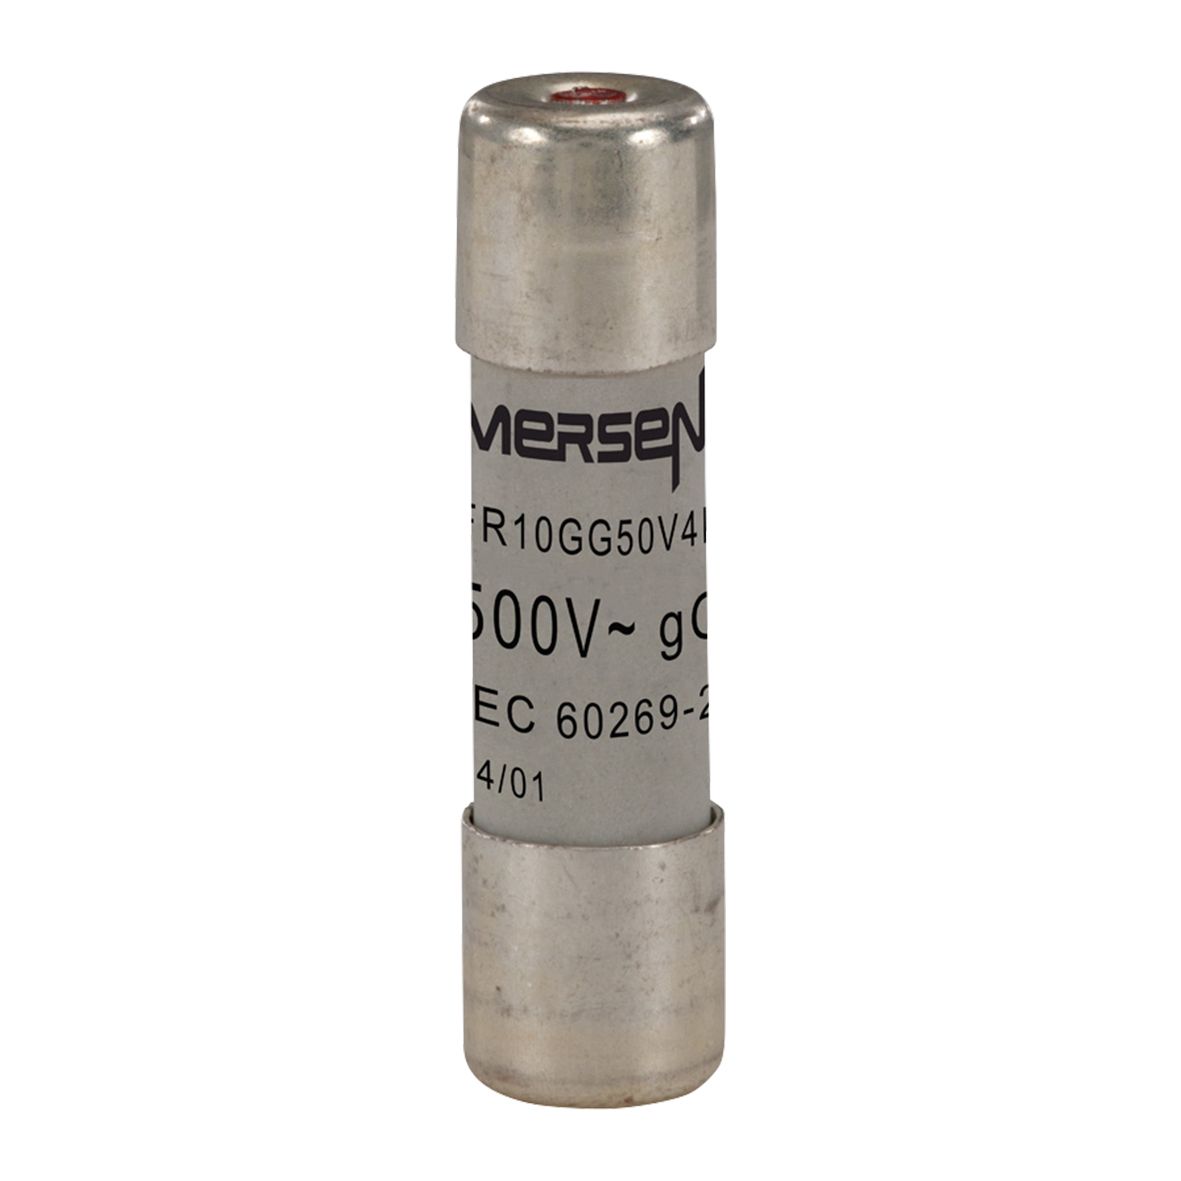 E217170 - Cylindrical fuse-link gG 500VAC 10.3x38, 4A with indicator